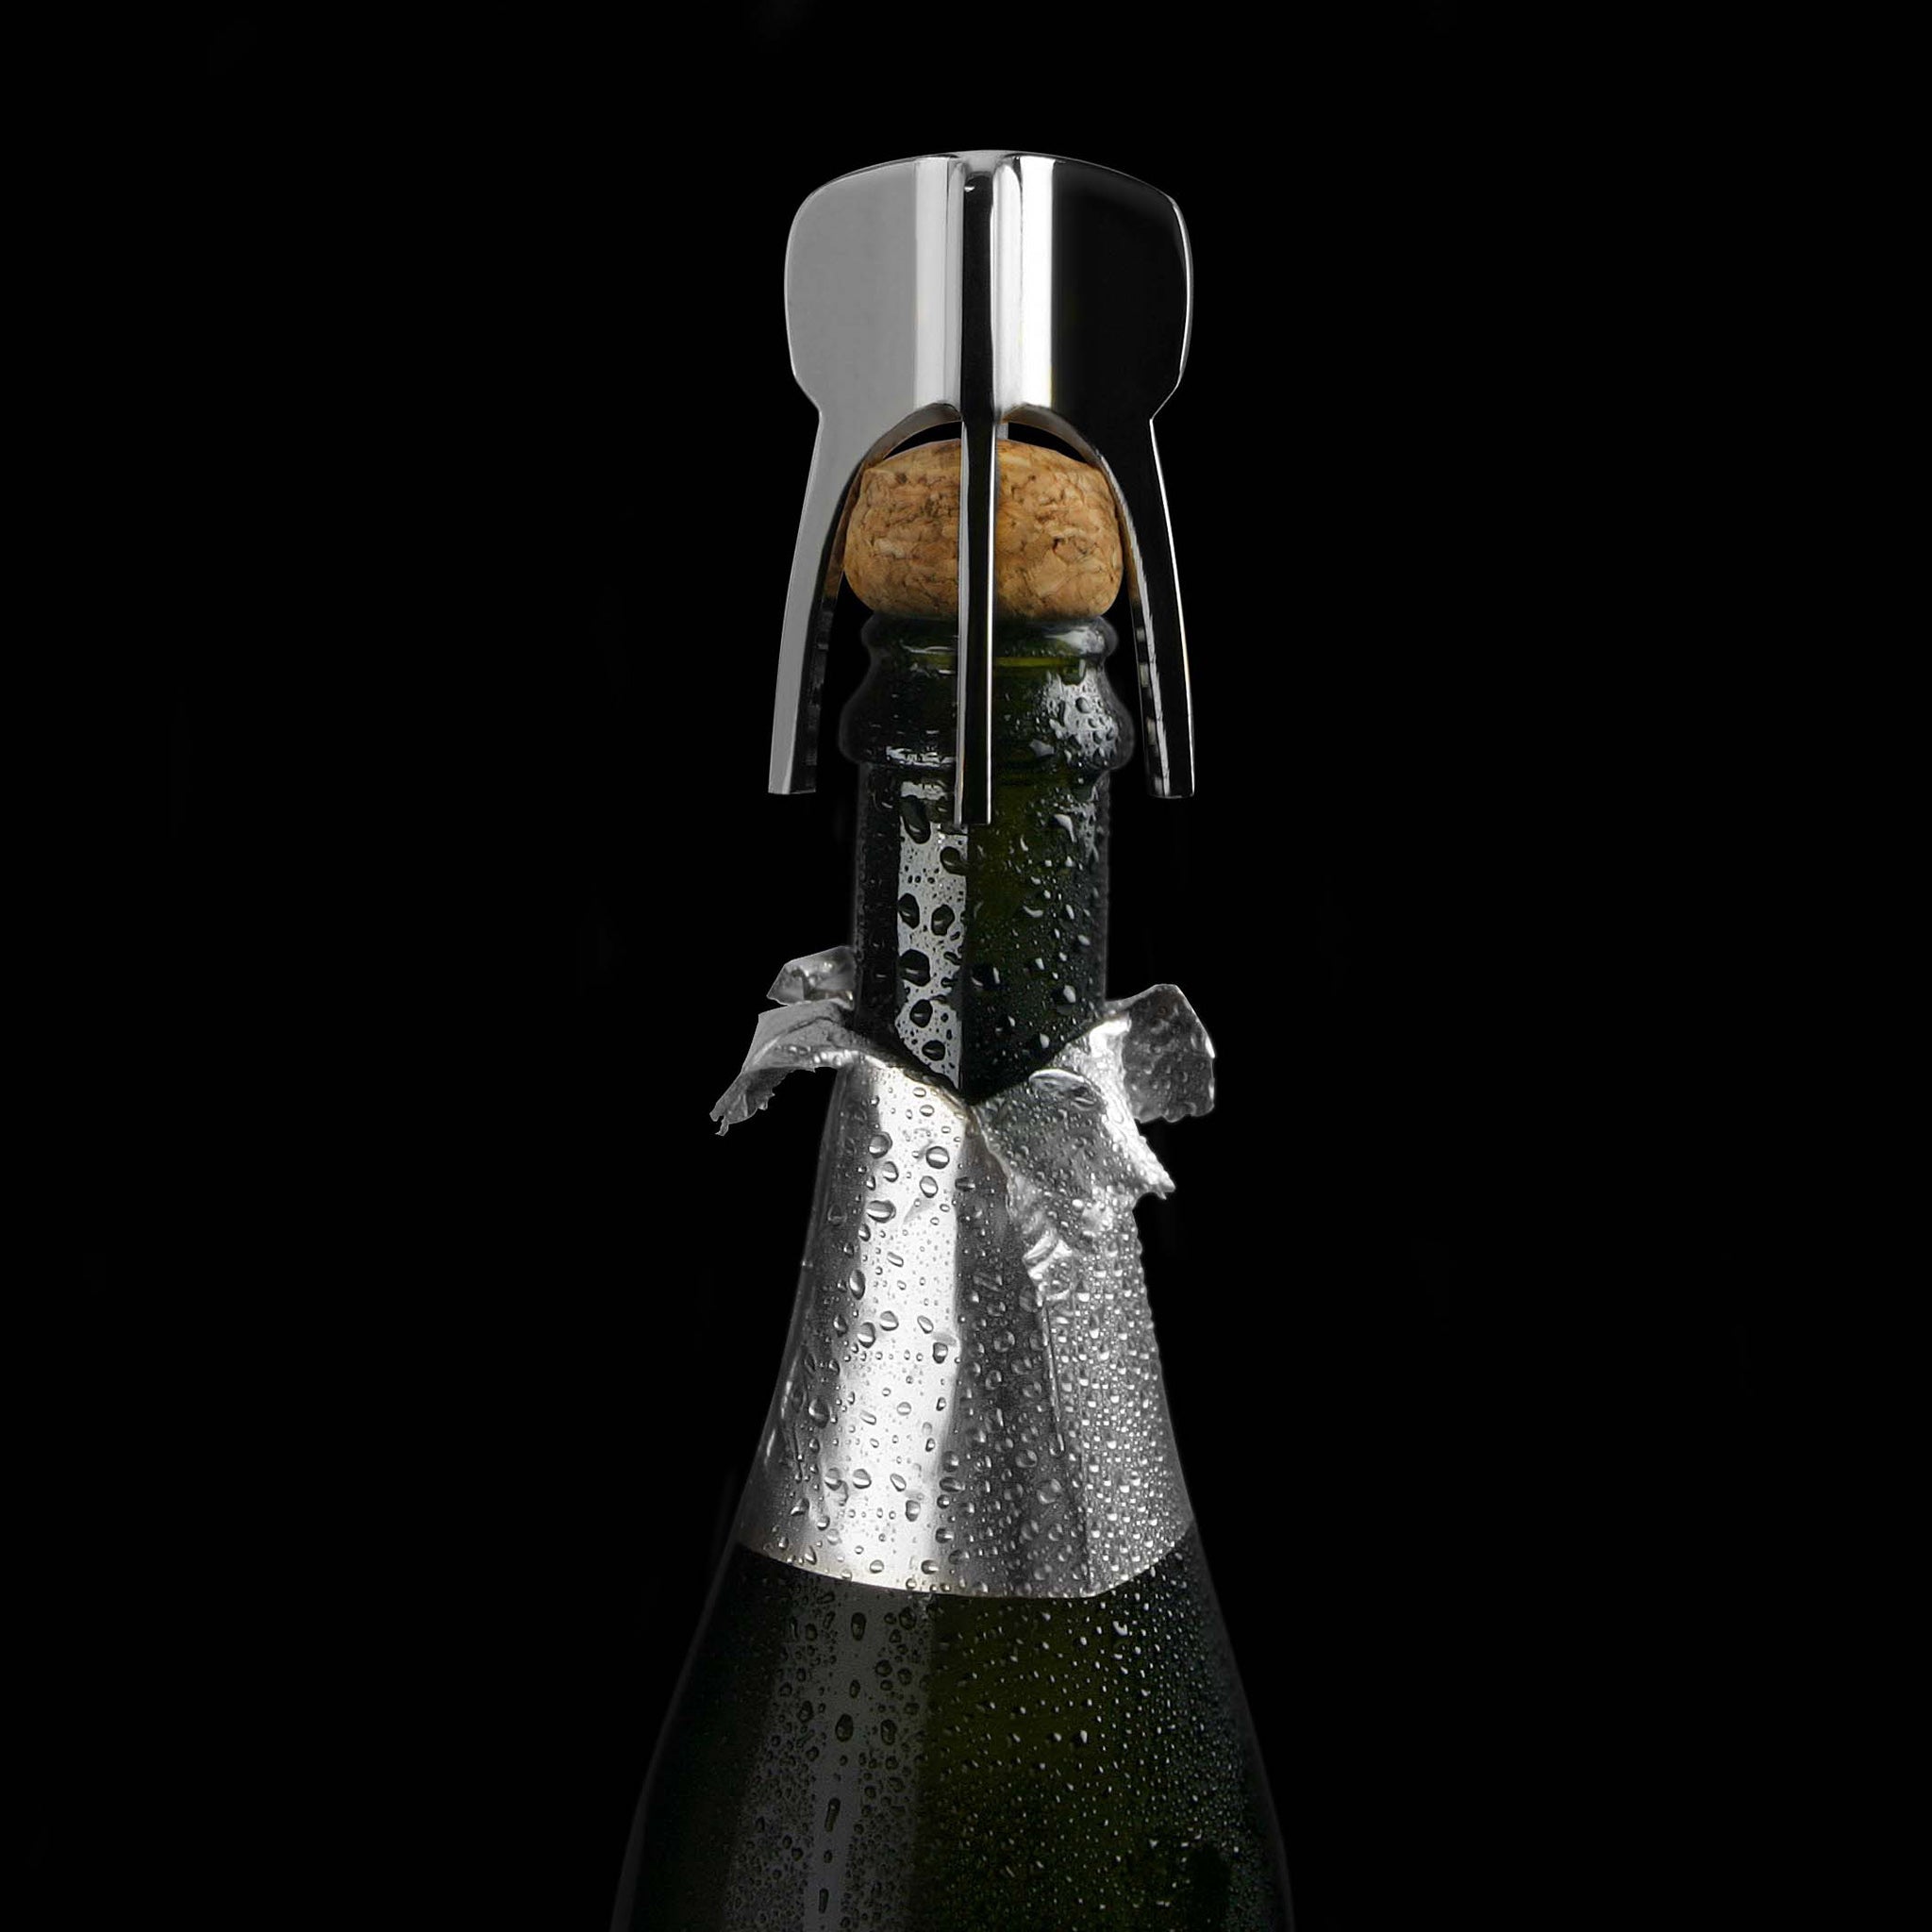  Vagnbys® Champagne Twister by Ethan+Ashe Ethan+Ashe Perfumarie